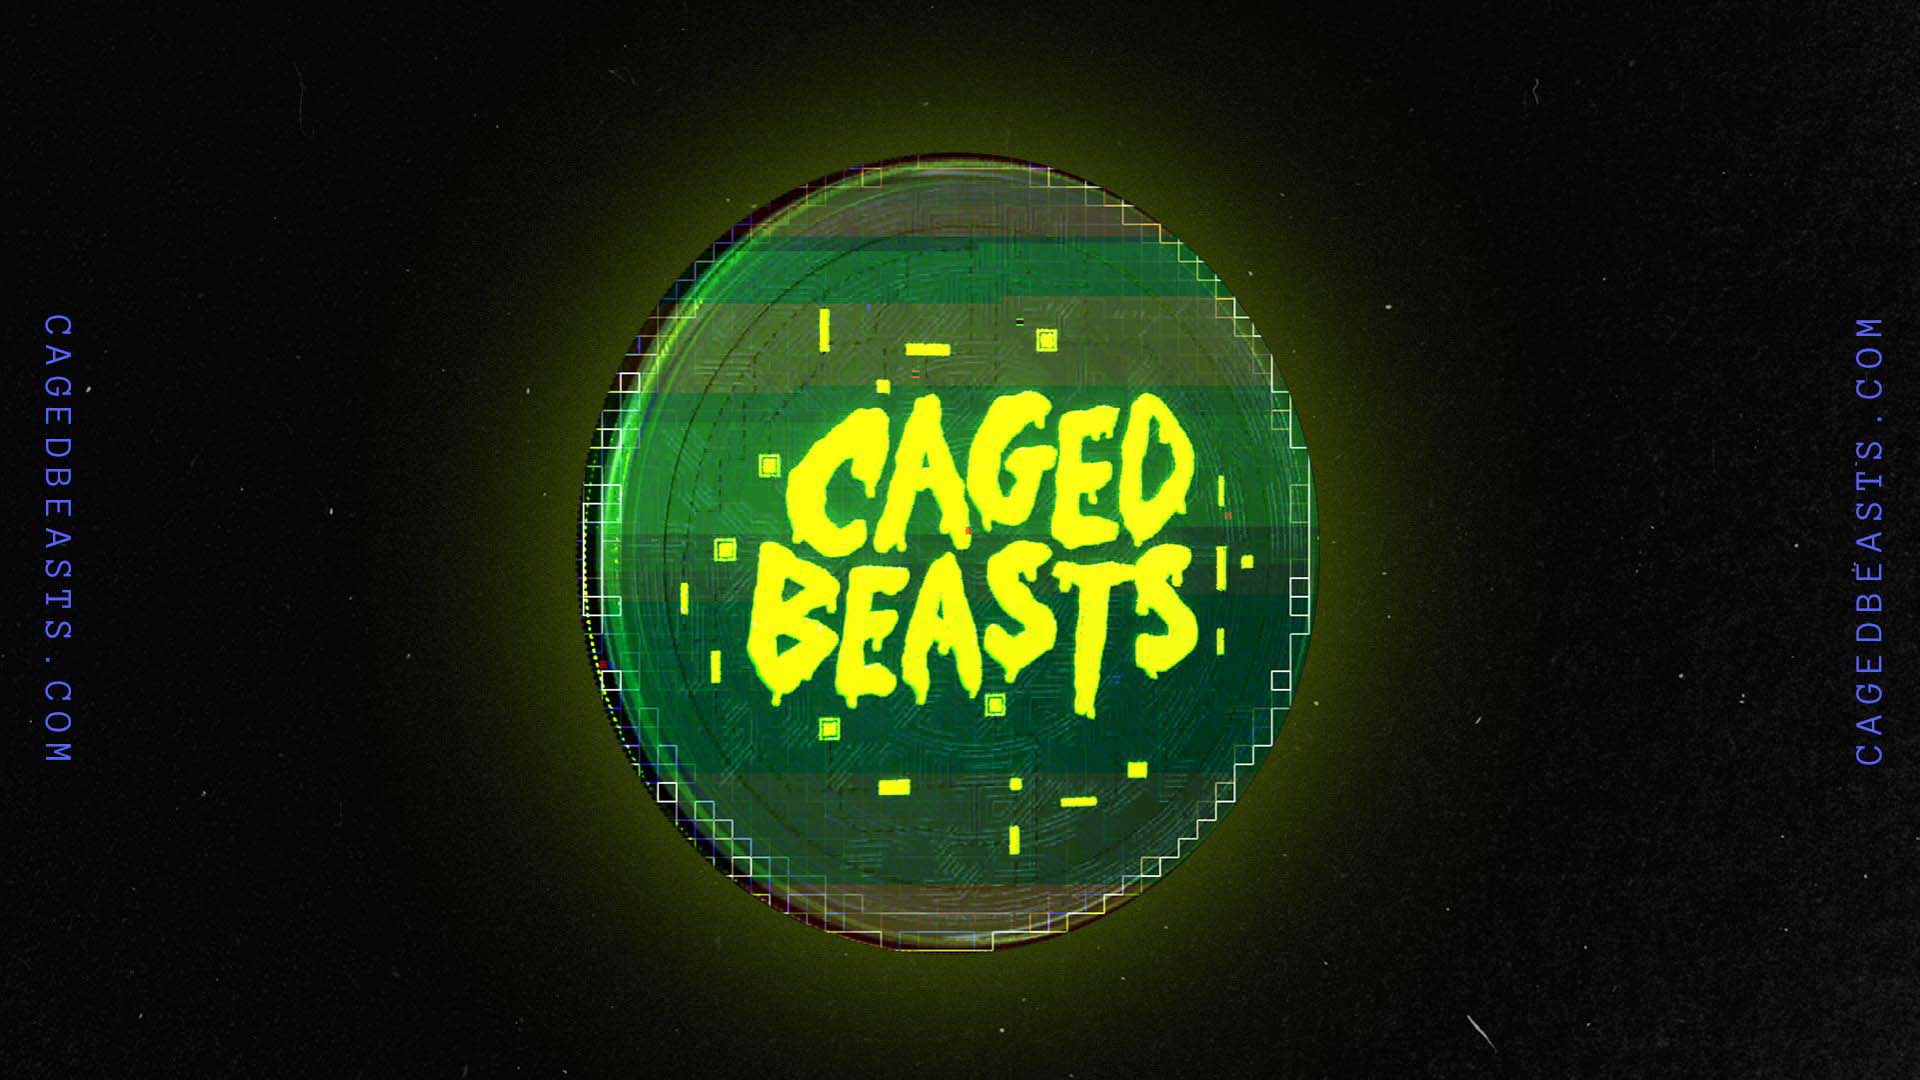 Caged Beasts Referrals vs. Staking Avalanche and Cardano: Which Has The Best Passive Income Opportunities?